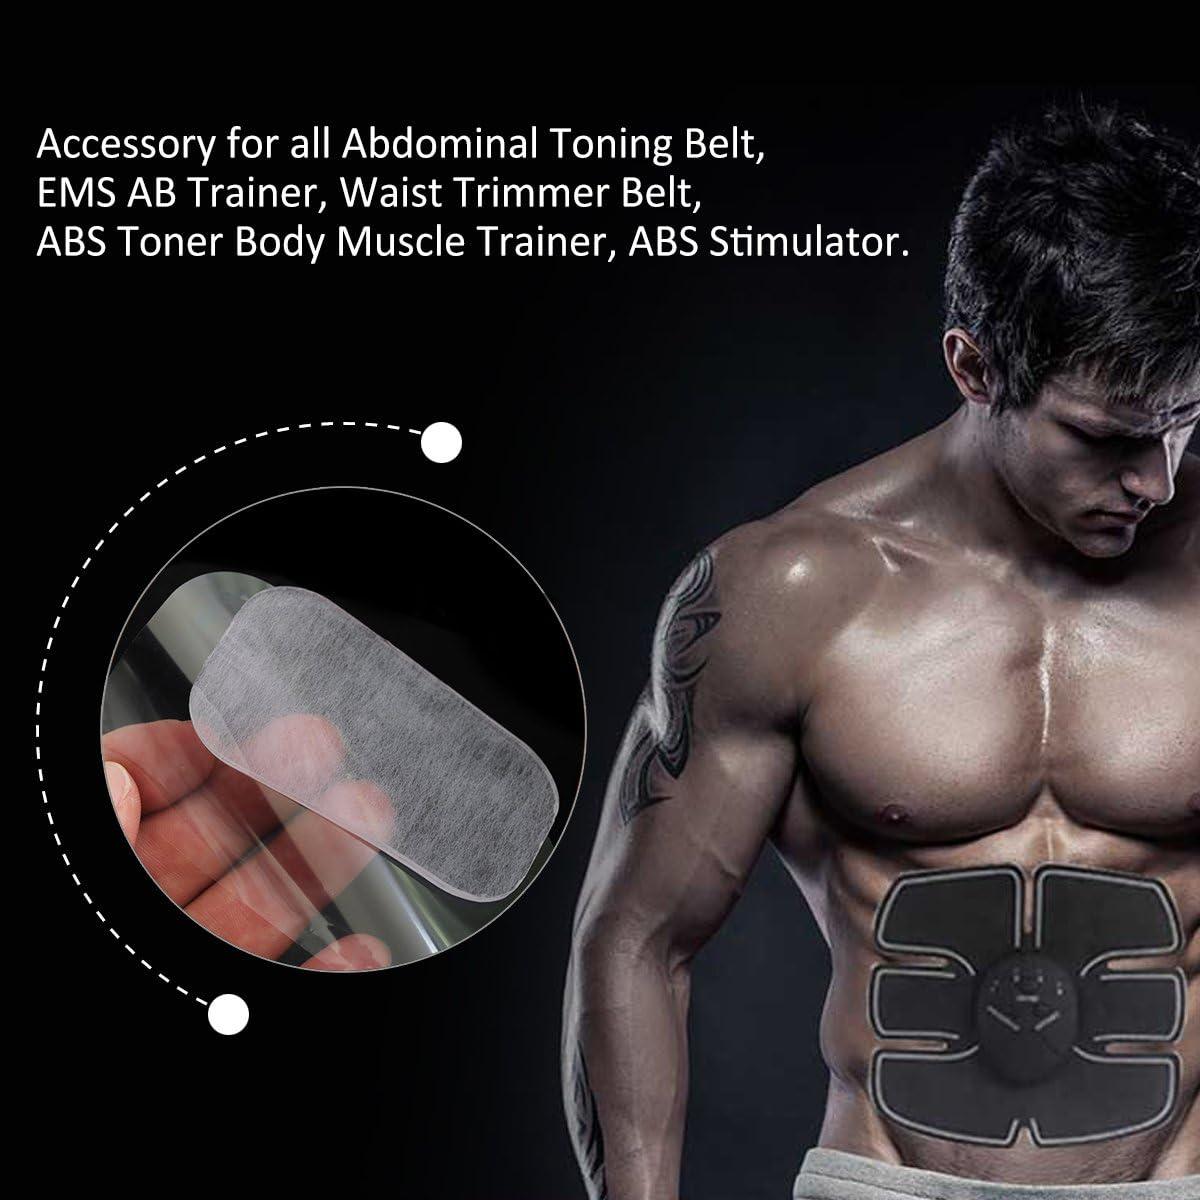 Muscle Toner Abdominal Toning Belt ABS Toner Body Muscle Trainer